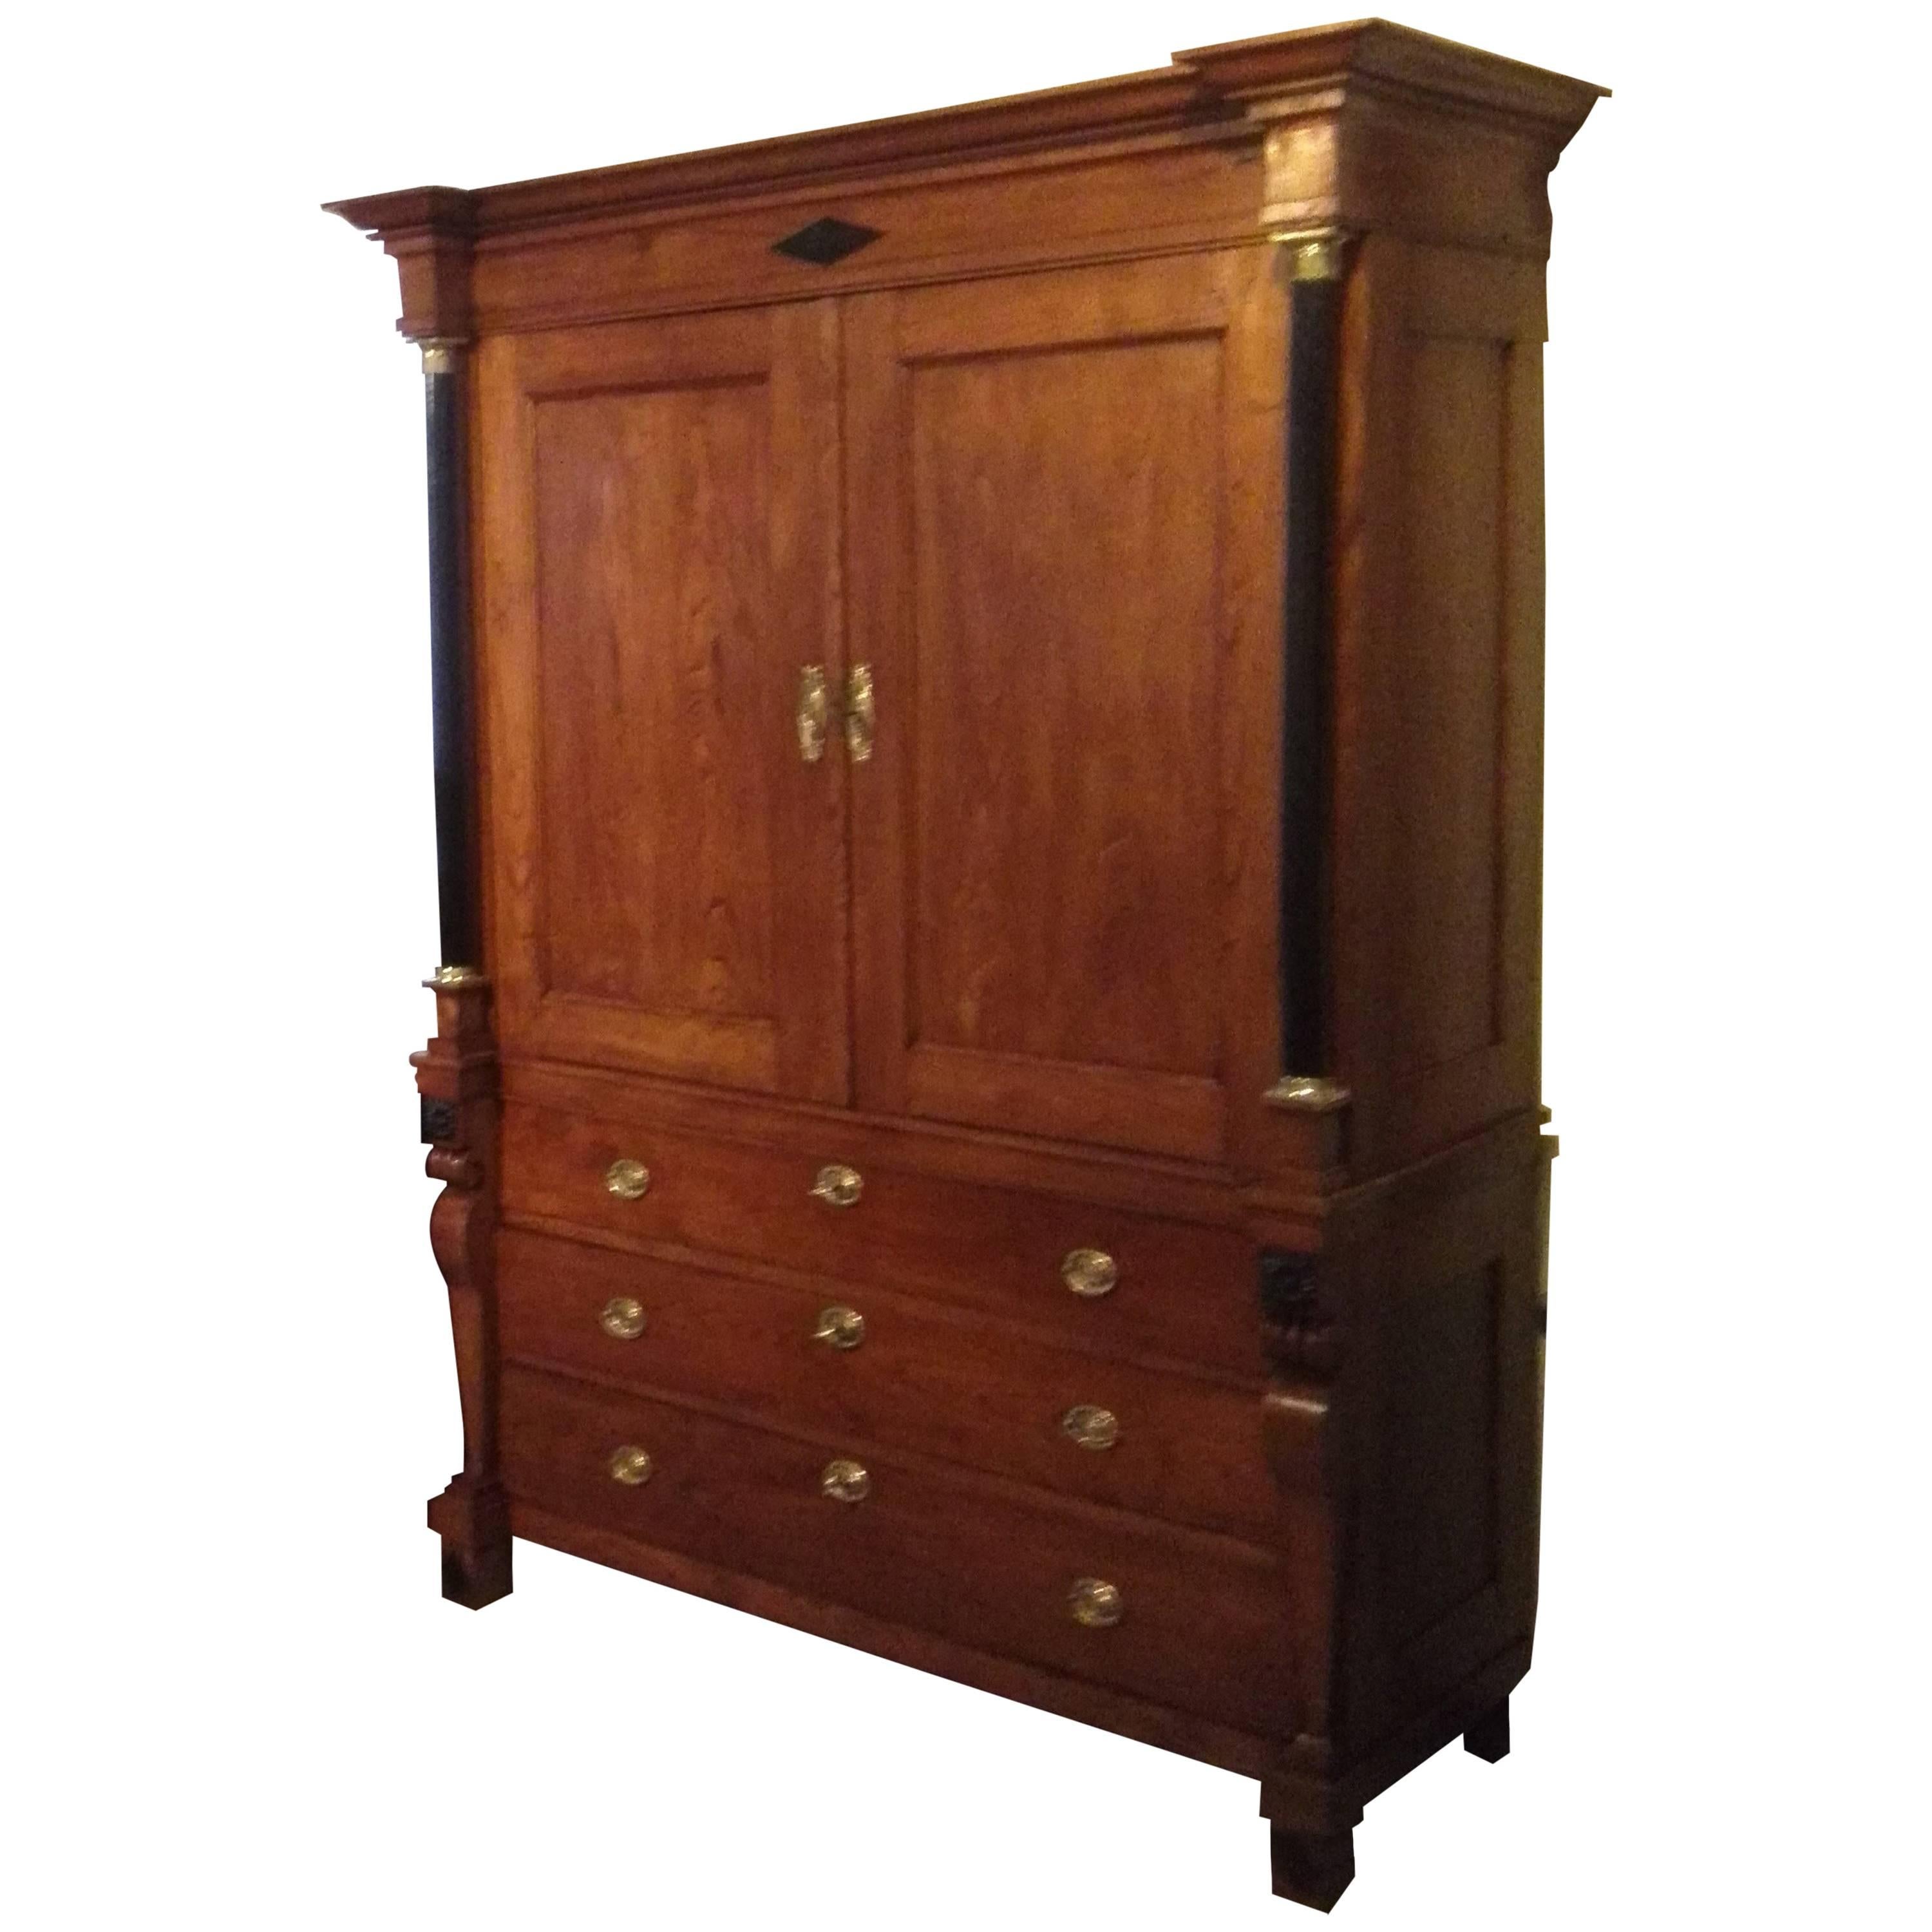 Great linen-press in perfect restored condition! Solid ashwood with ebonized full columns! With original pedestals and capitals in polished gold brass! The application in ebonized, polished wood. All fittings and box locks are original and